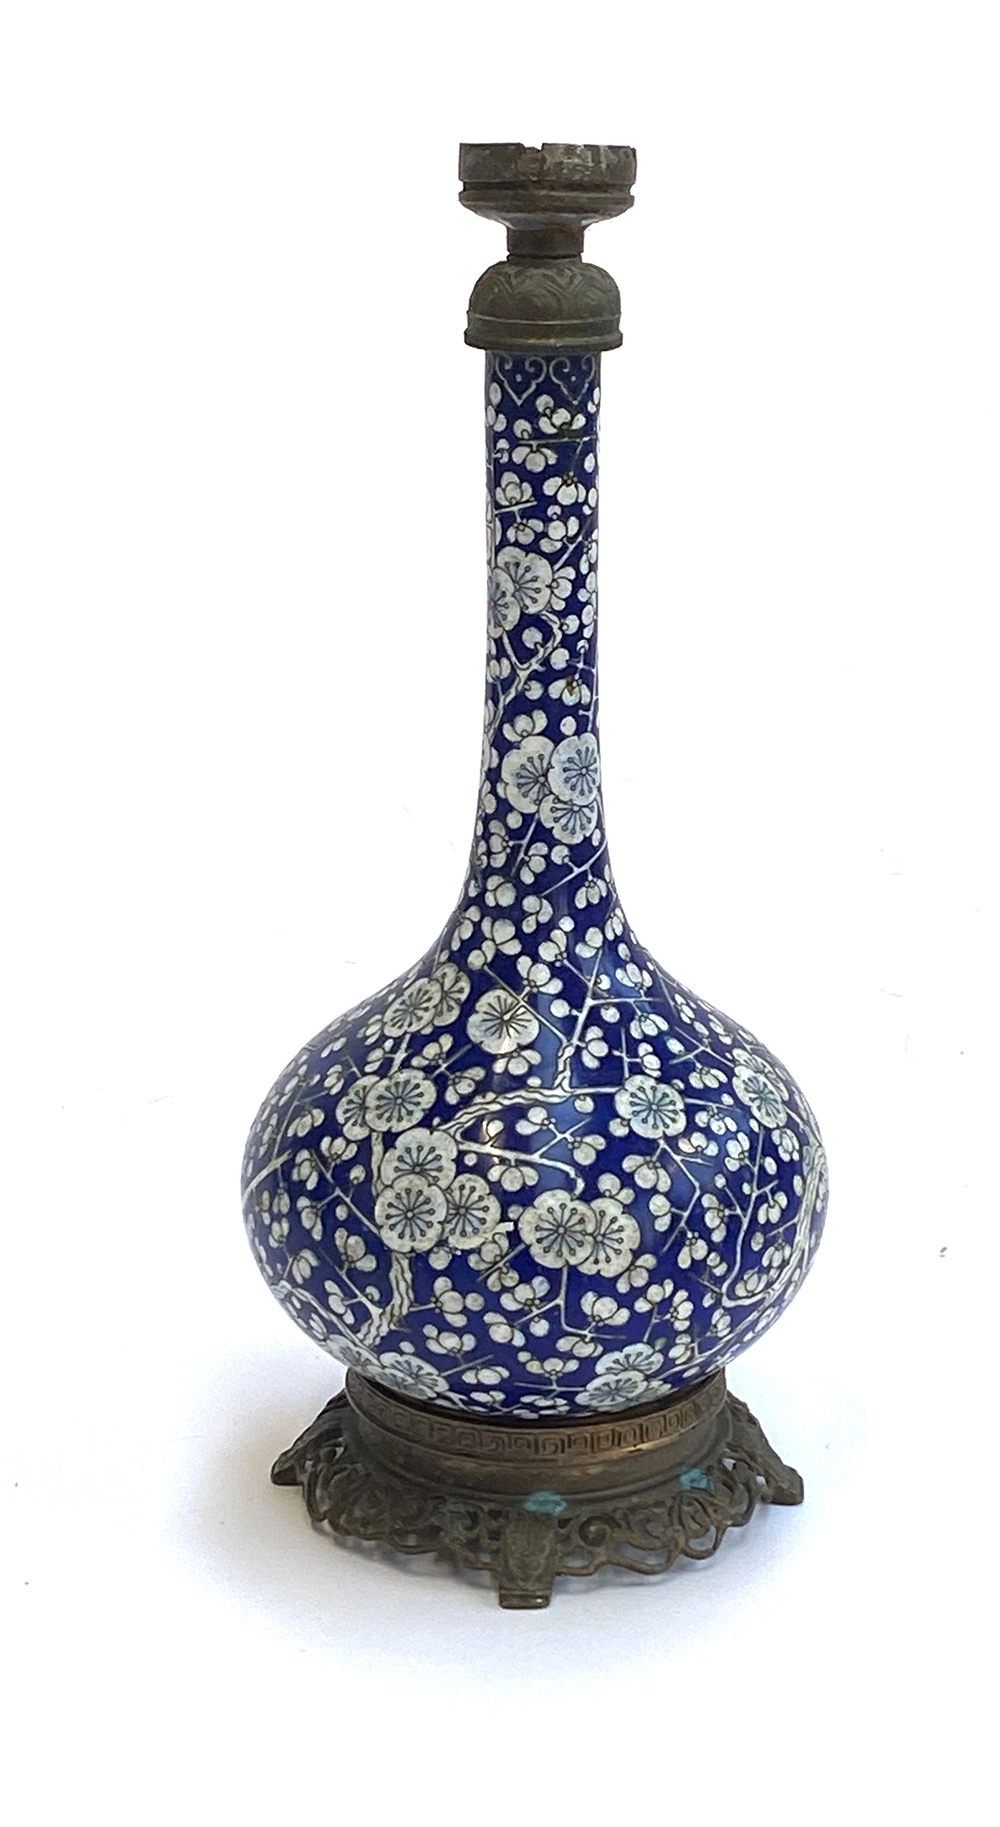 A late 19th/early 20th century Chinese cloisonne enamel vase, prunus design, partially converted for